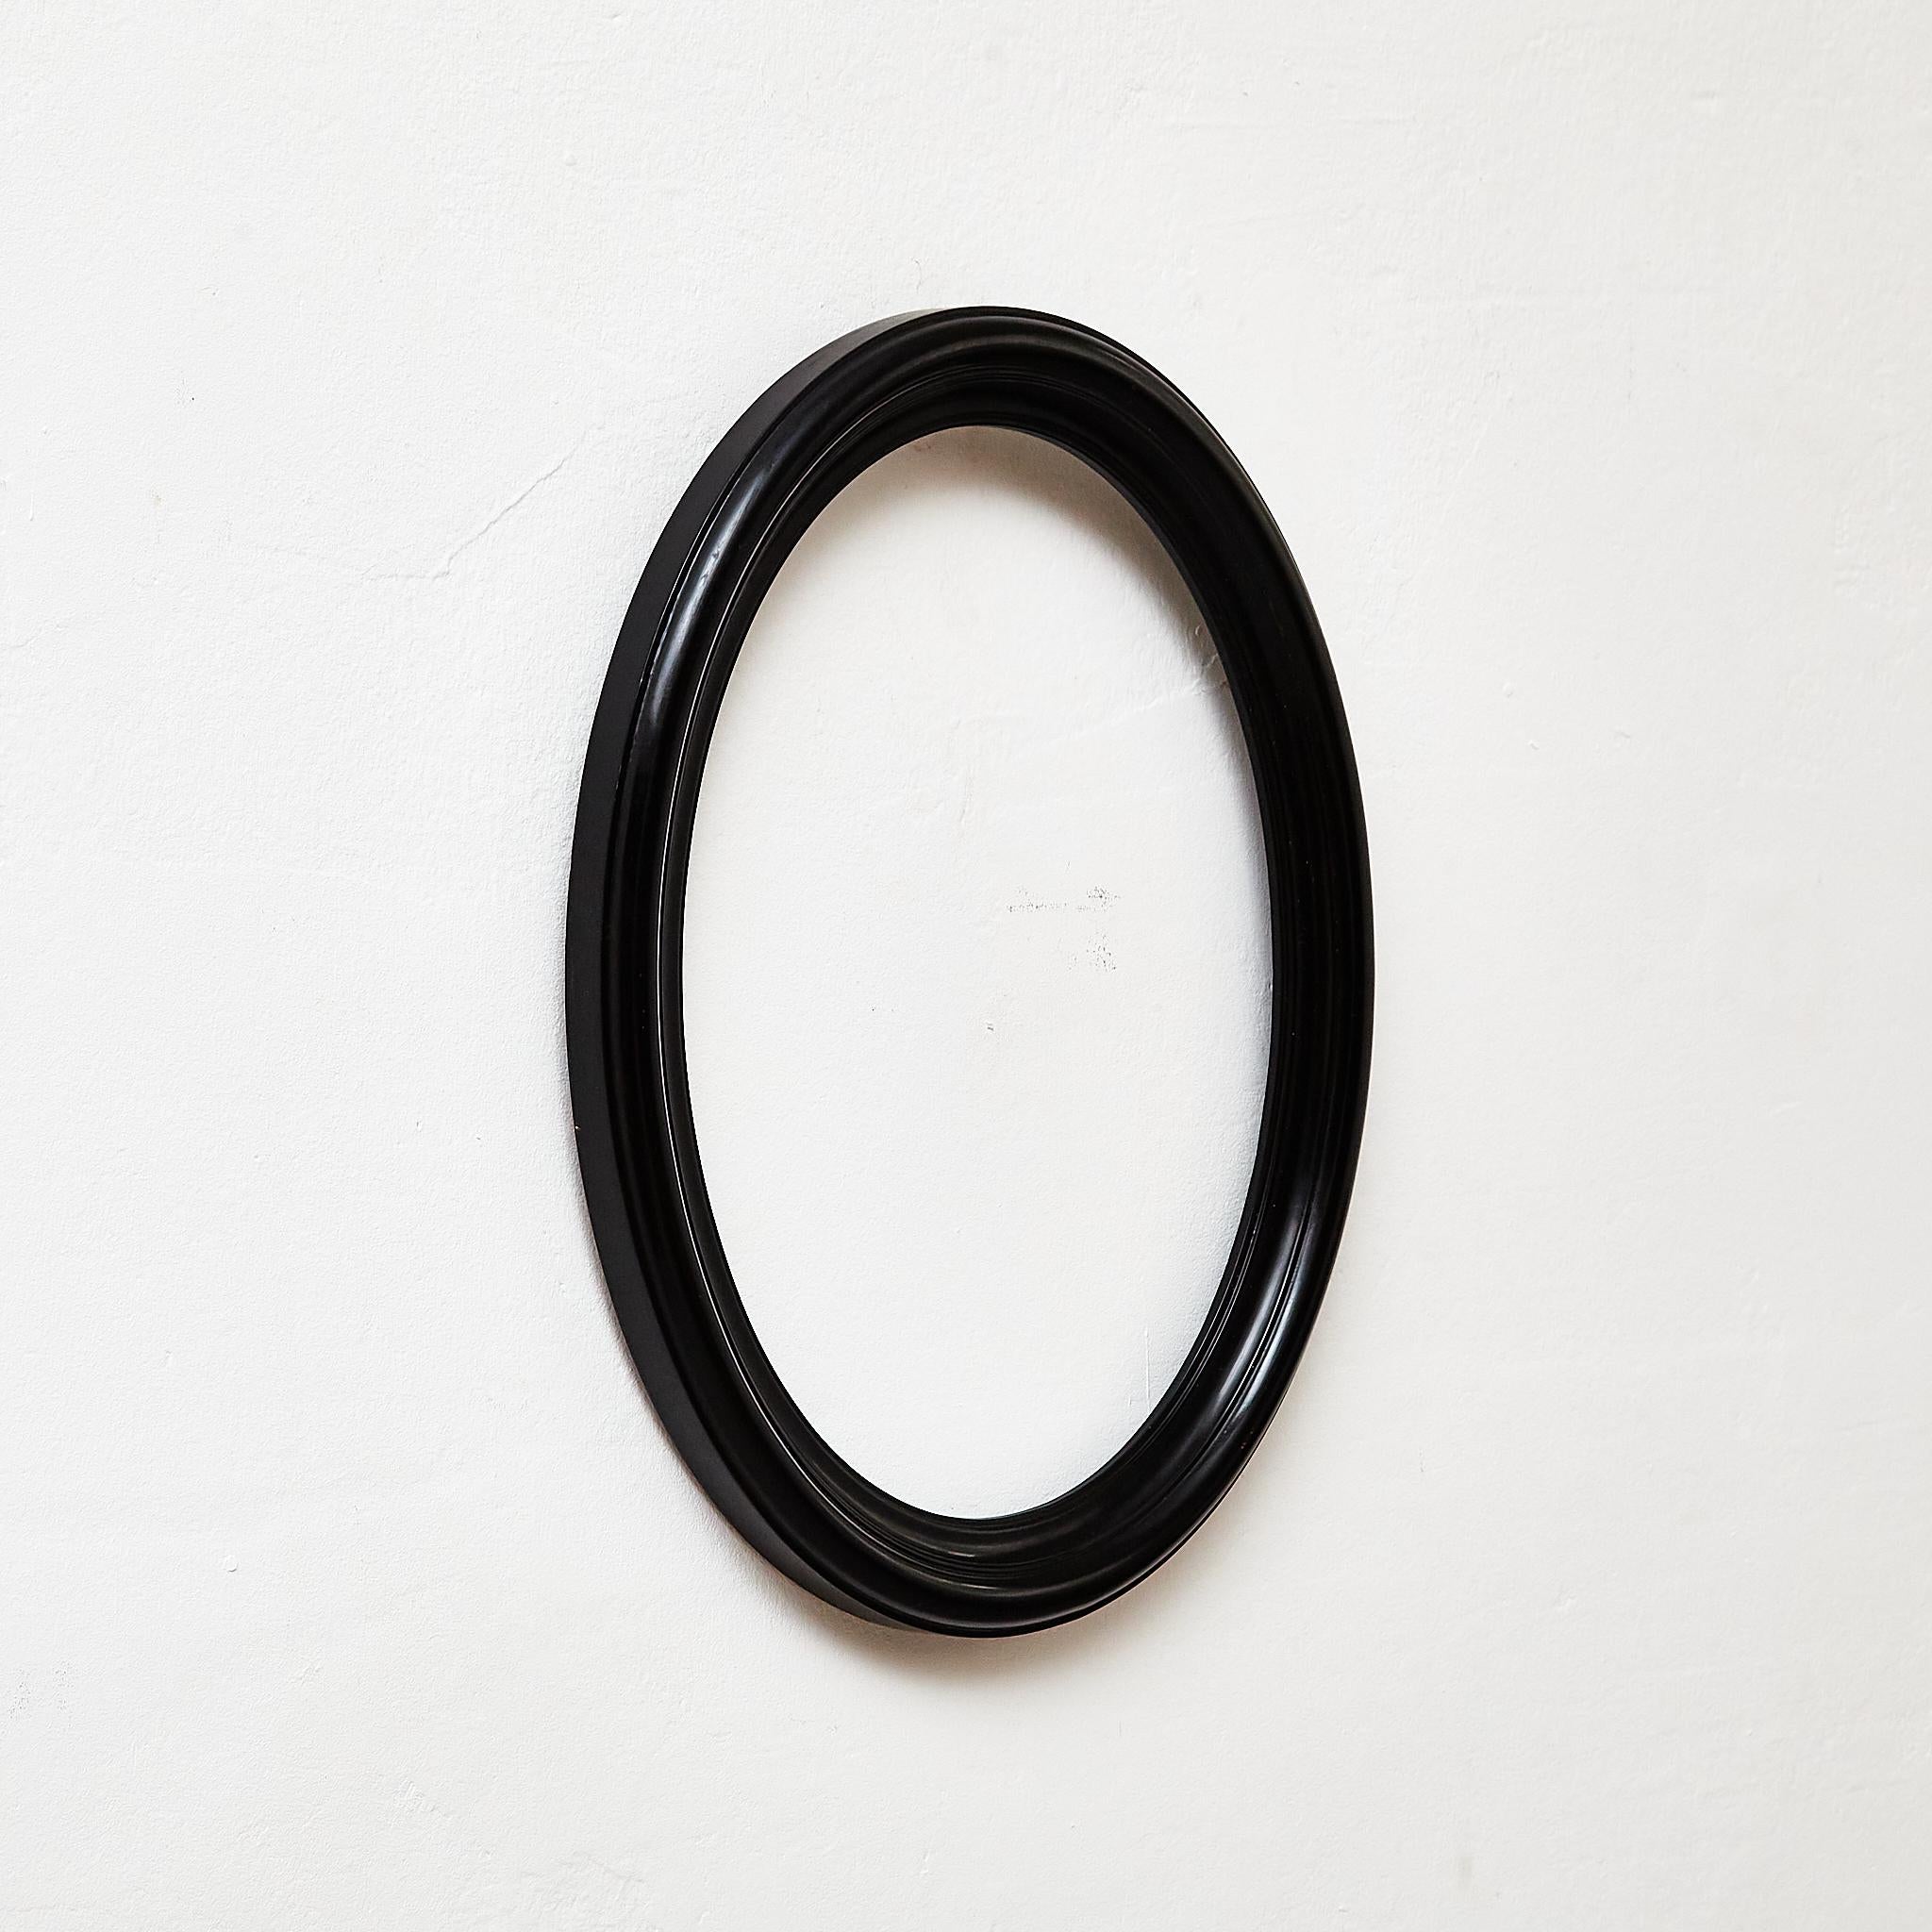 Antique Black Oval Wood Laquered Frame.

Manufactured France, circa 1940.

Materials:
Wood

Dimensions: 
D 3 x W 35 cm x H 45 cm

In original condition, with minor wear consistent with age and use, preserving a beautiful